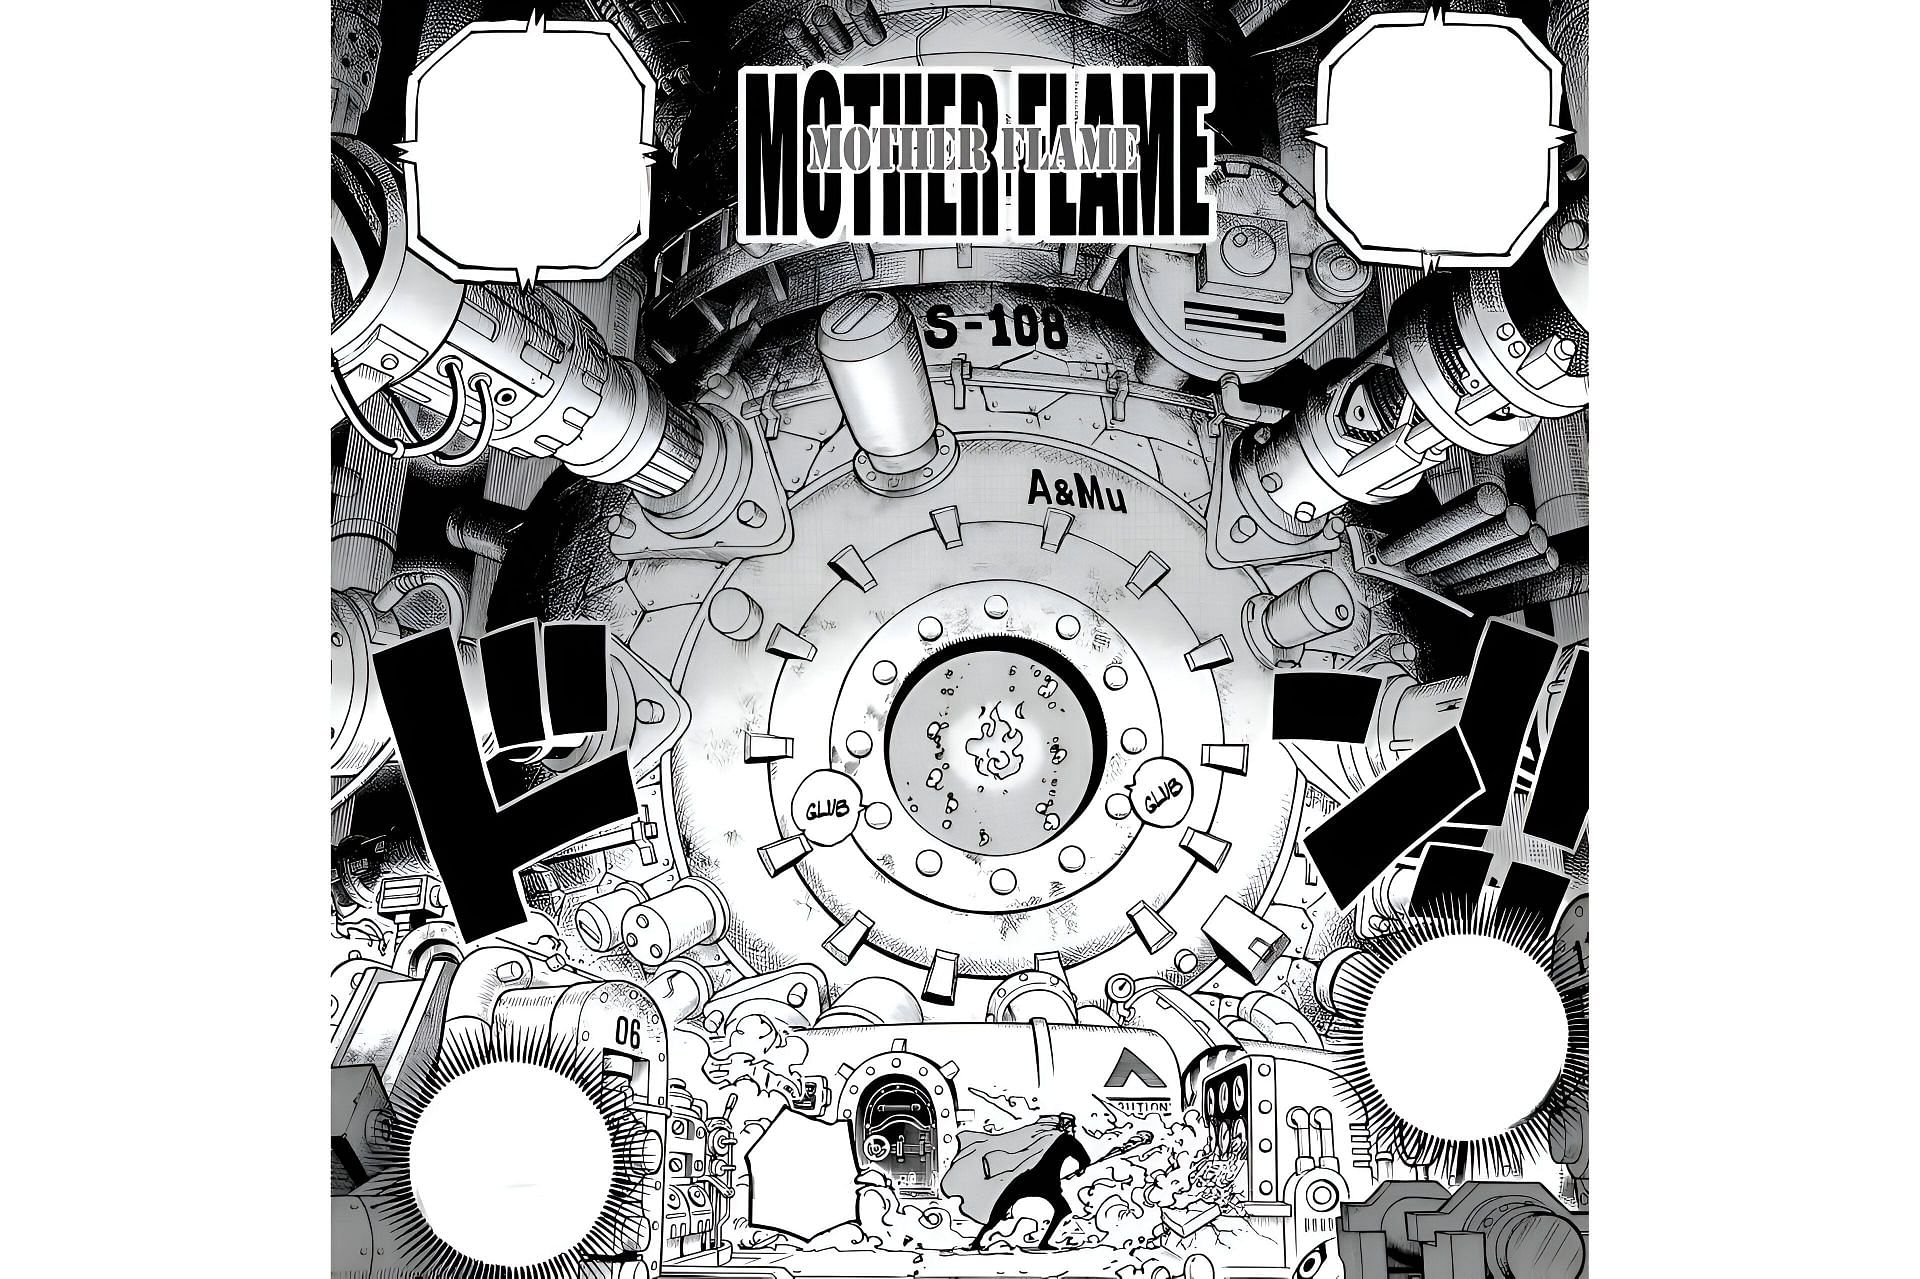 The Mother Flame containment chamber as seen in the manga (Image via Shueisha)